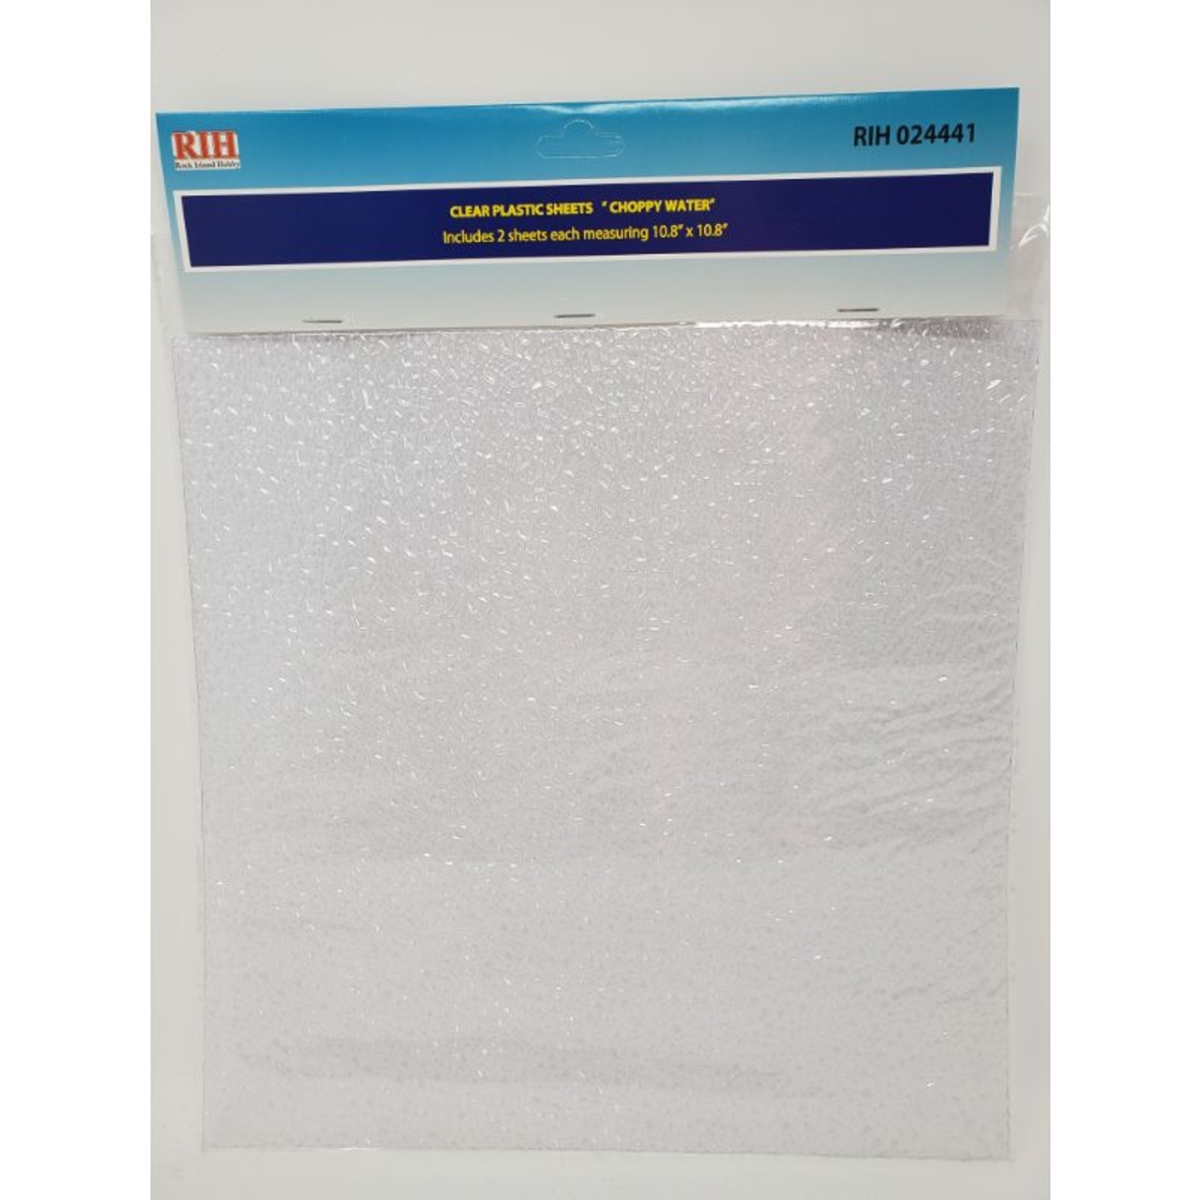 Picture of Rock Island Hobby RIH024441 Plastic Sheet - Small Ripple